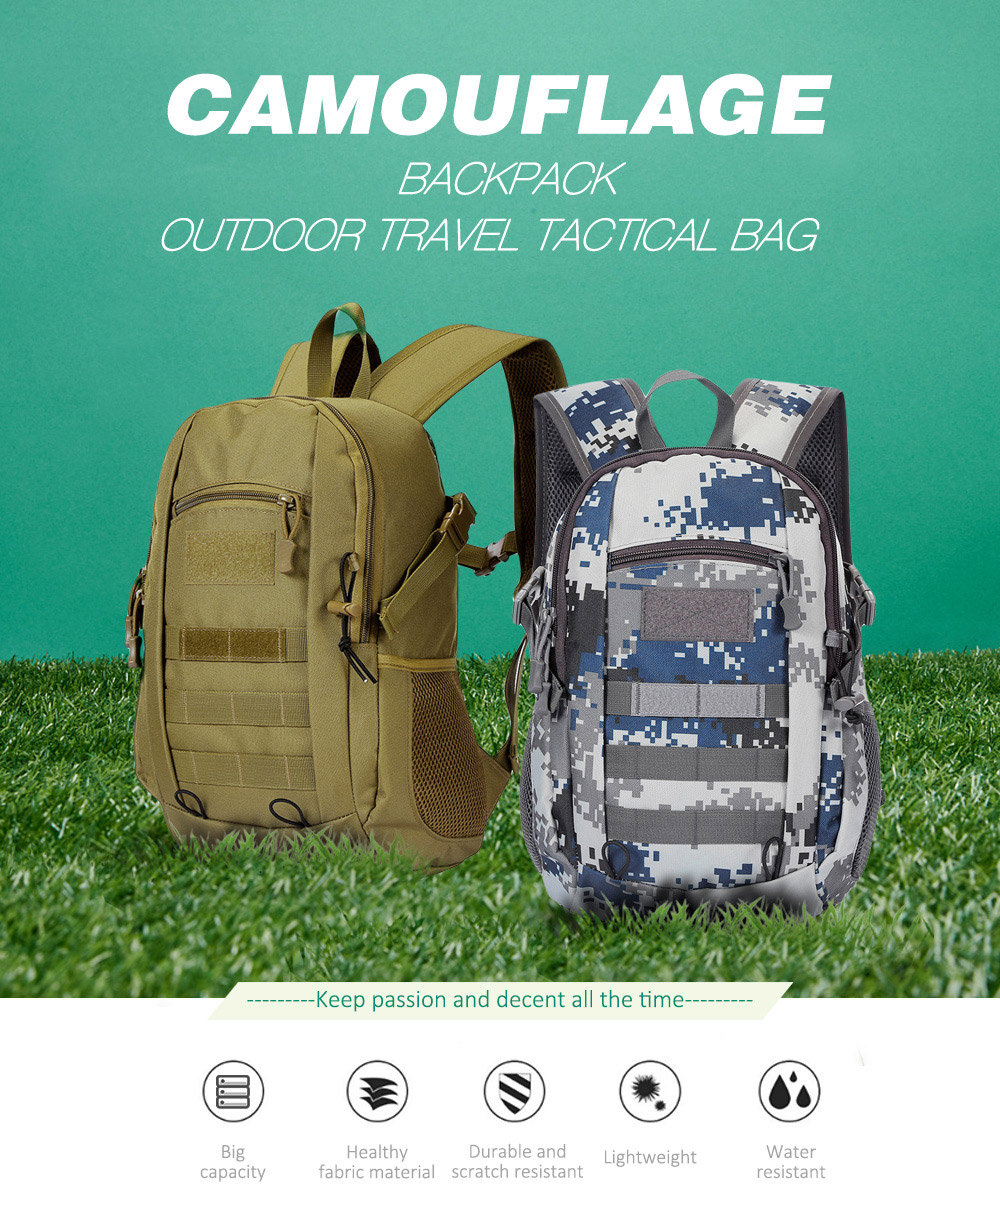 Camouflage Backpack Outdoor Travel Men Women Tactical Army Fan Bag